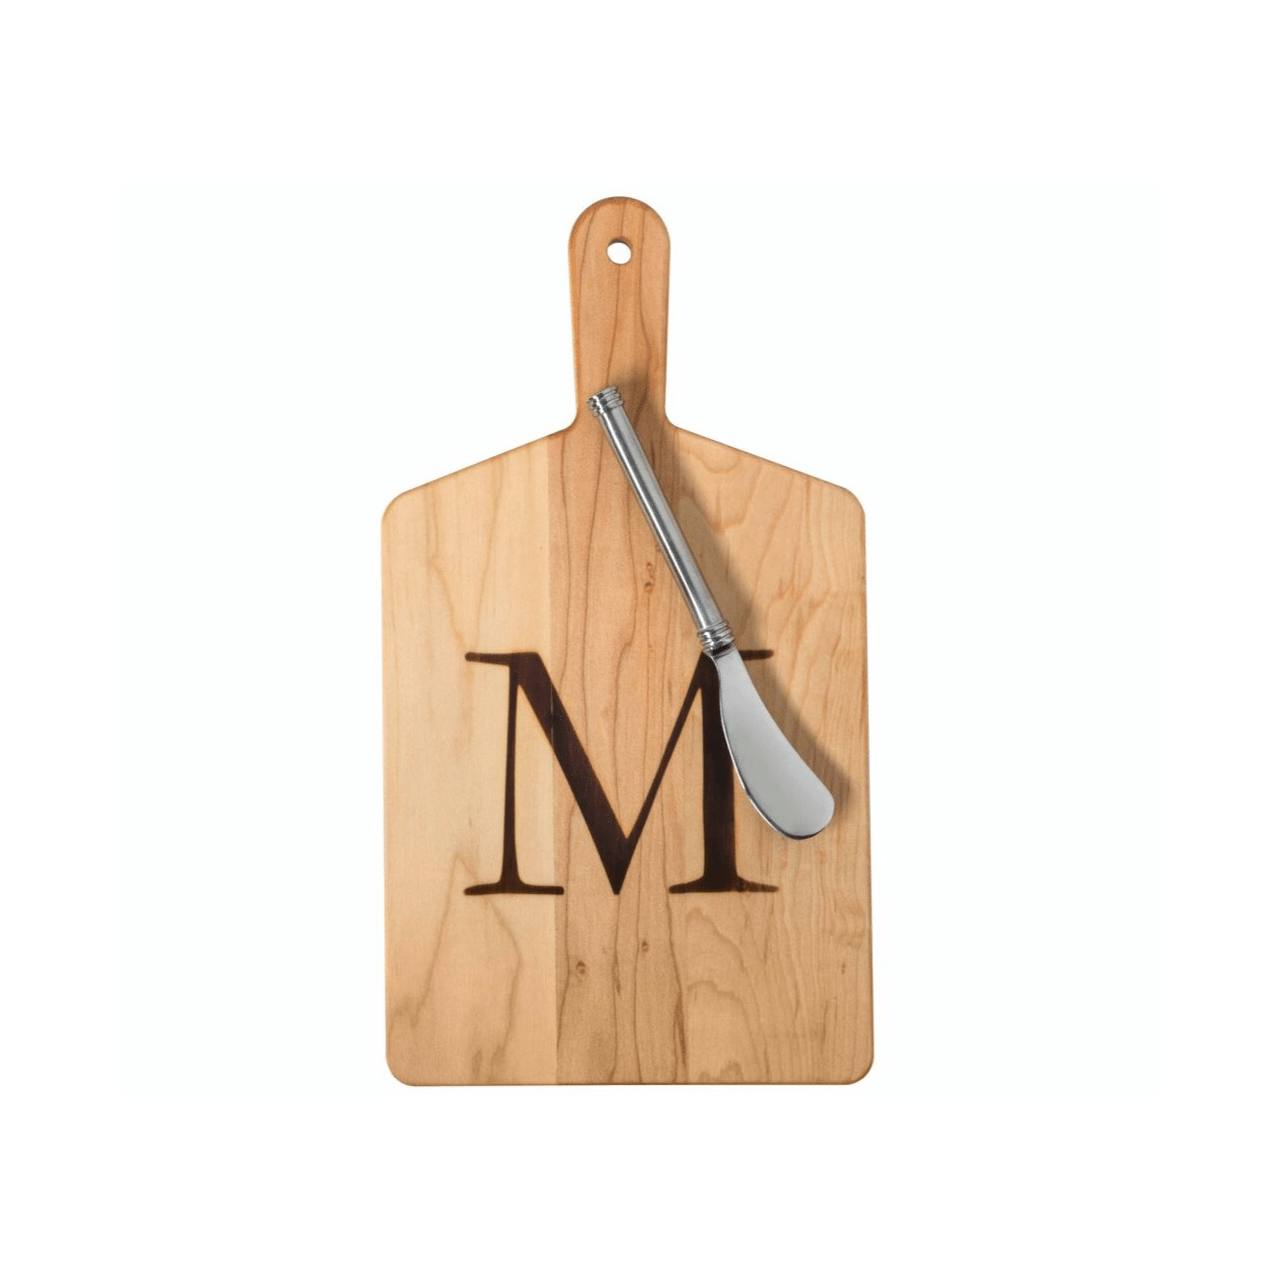 Maple Cheese Board with a Stamped B and Metal Spreader